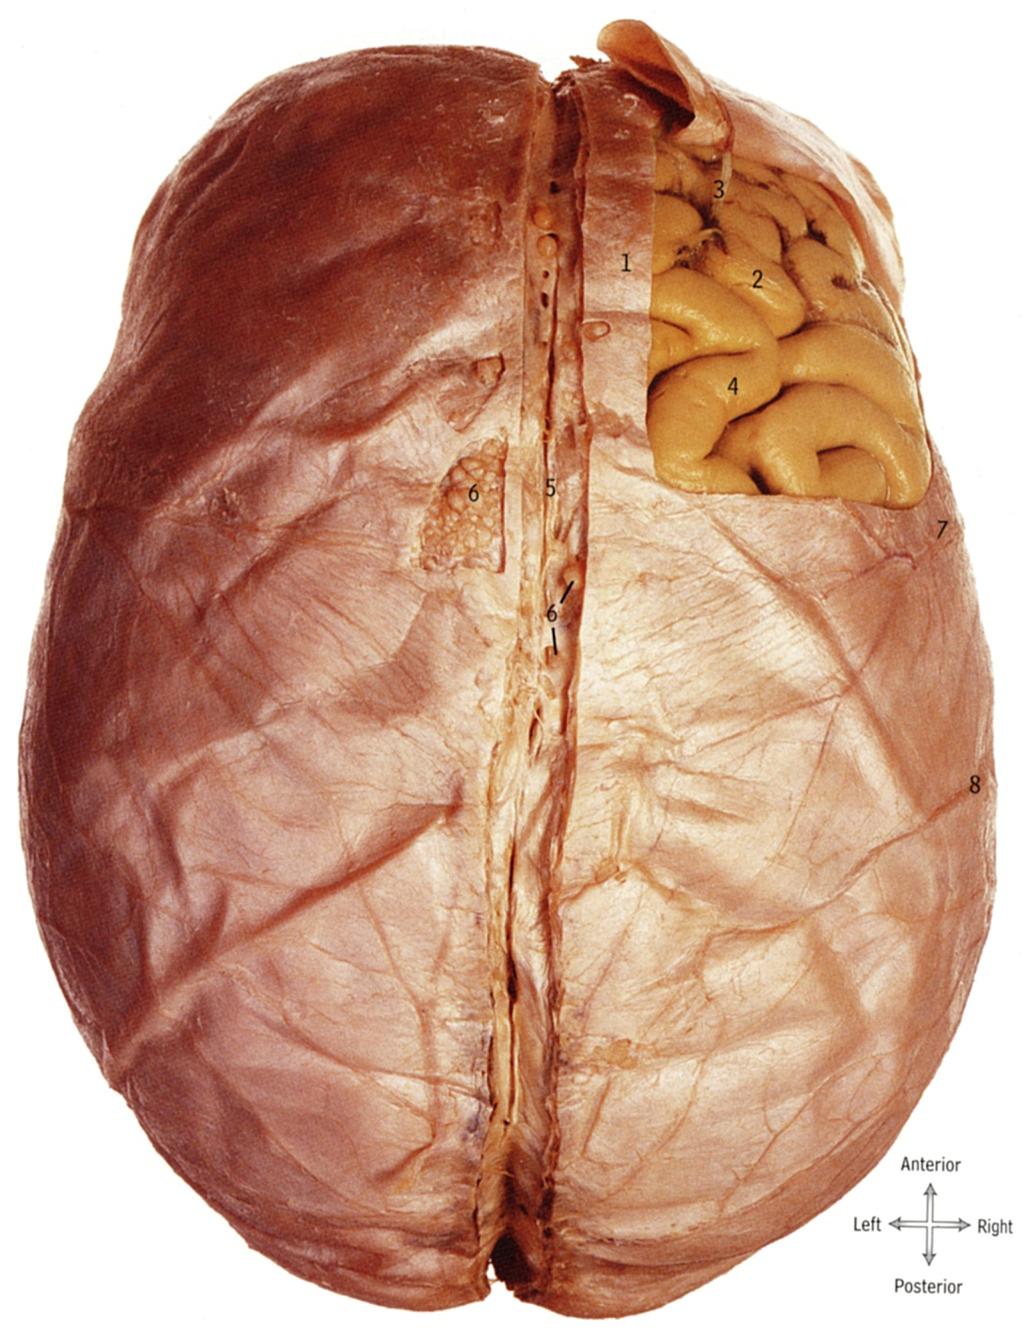 Layers of the Meninges Dura mater (or dura): very dense and tough